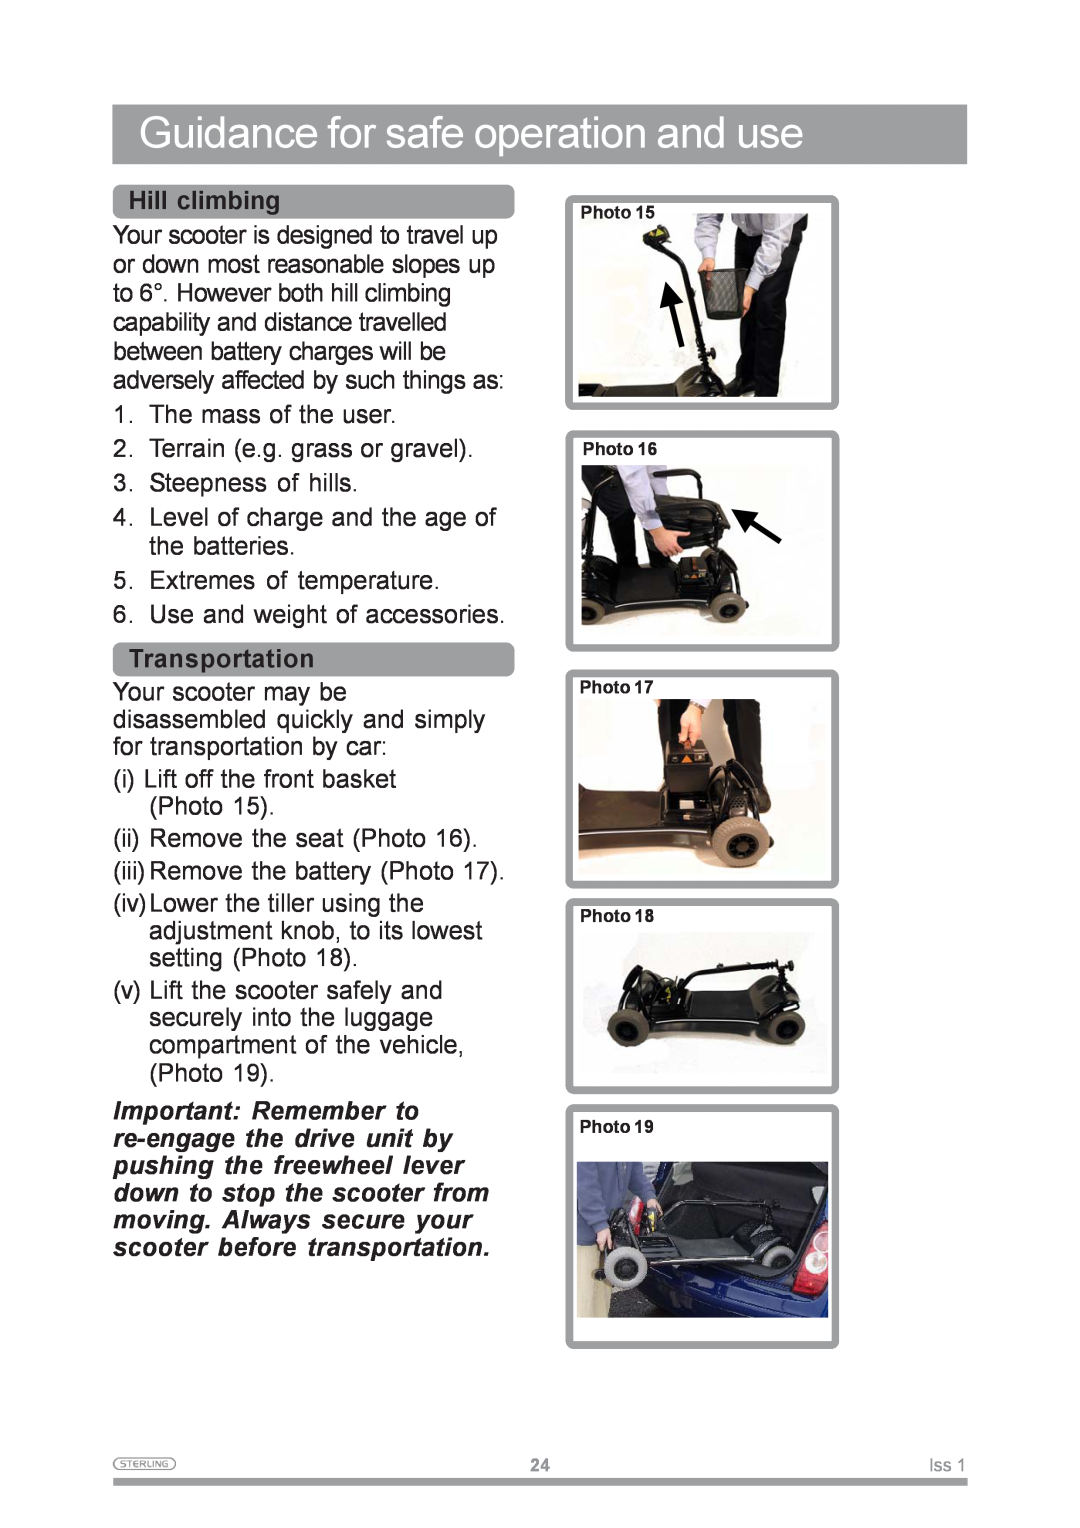 Sunrise Medical Mobility Scooter owner manual Guidance for safe operation and use, Hill climbing, Transportation 